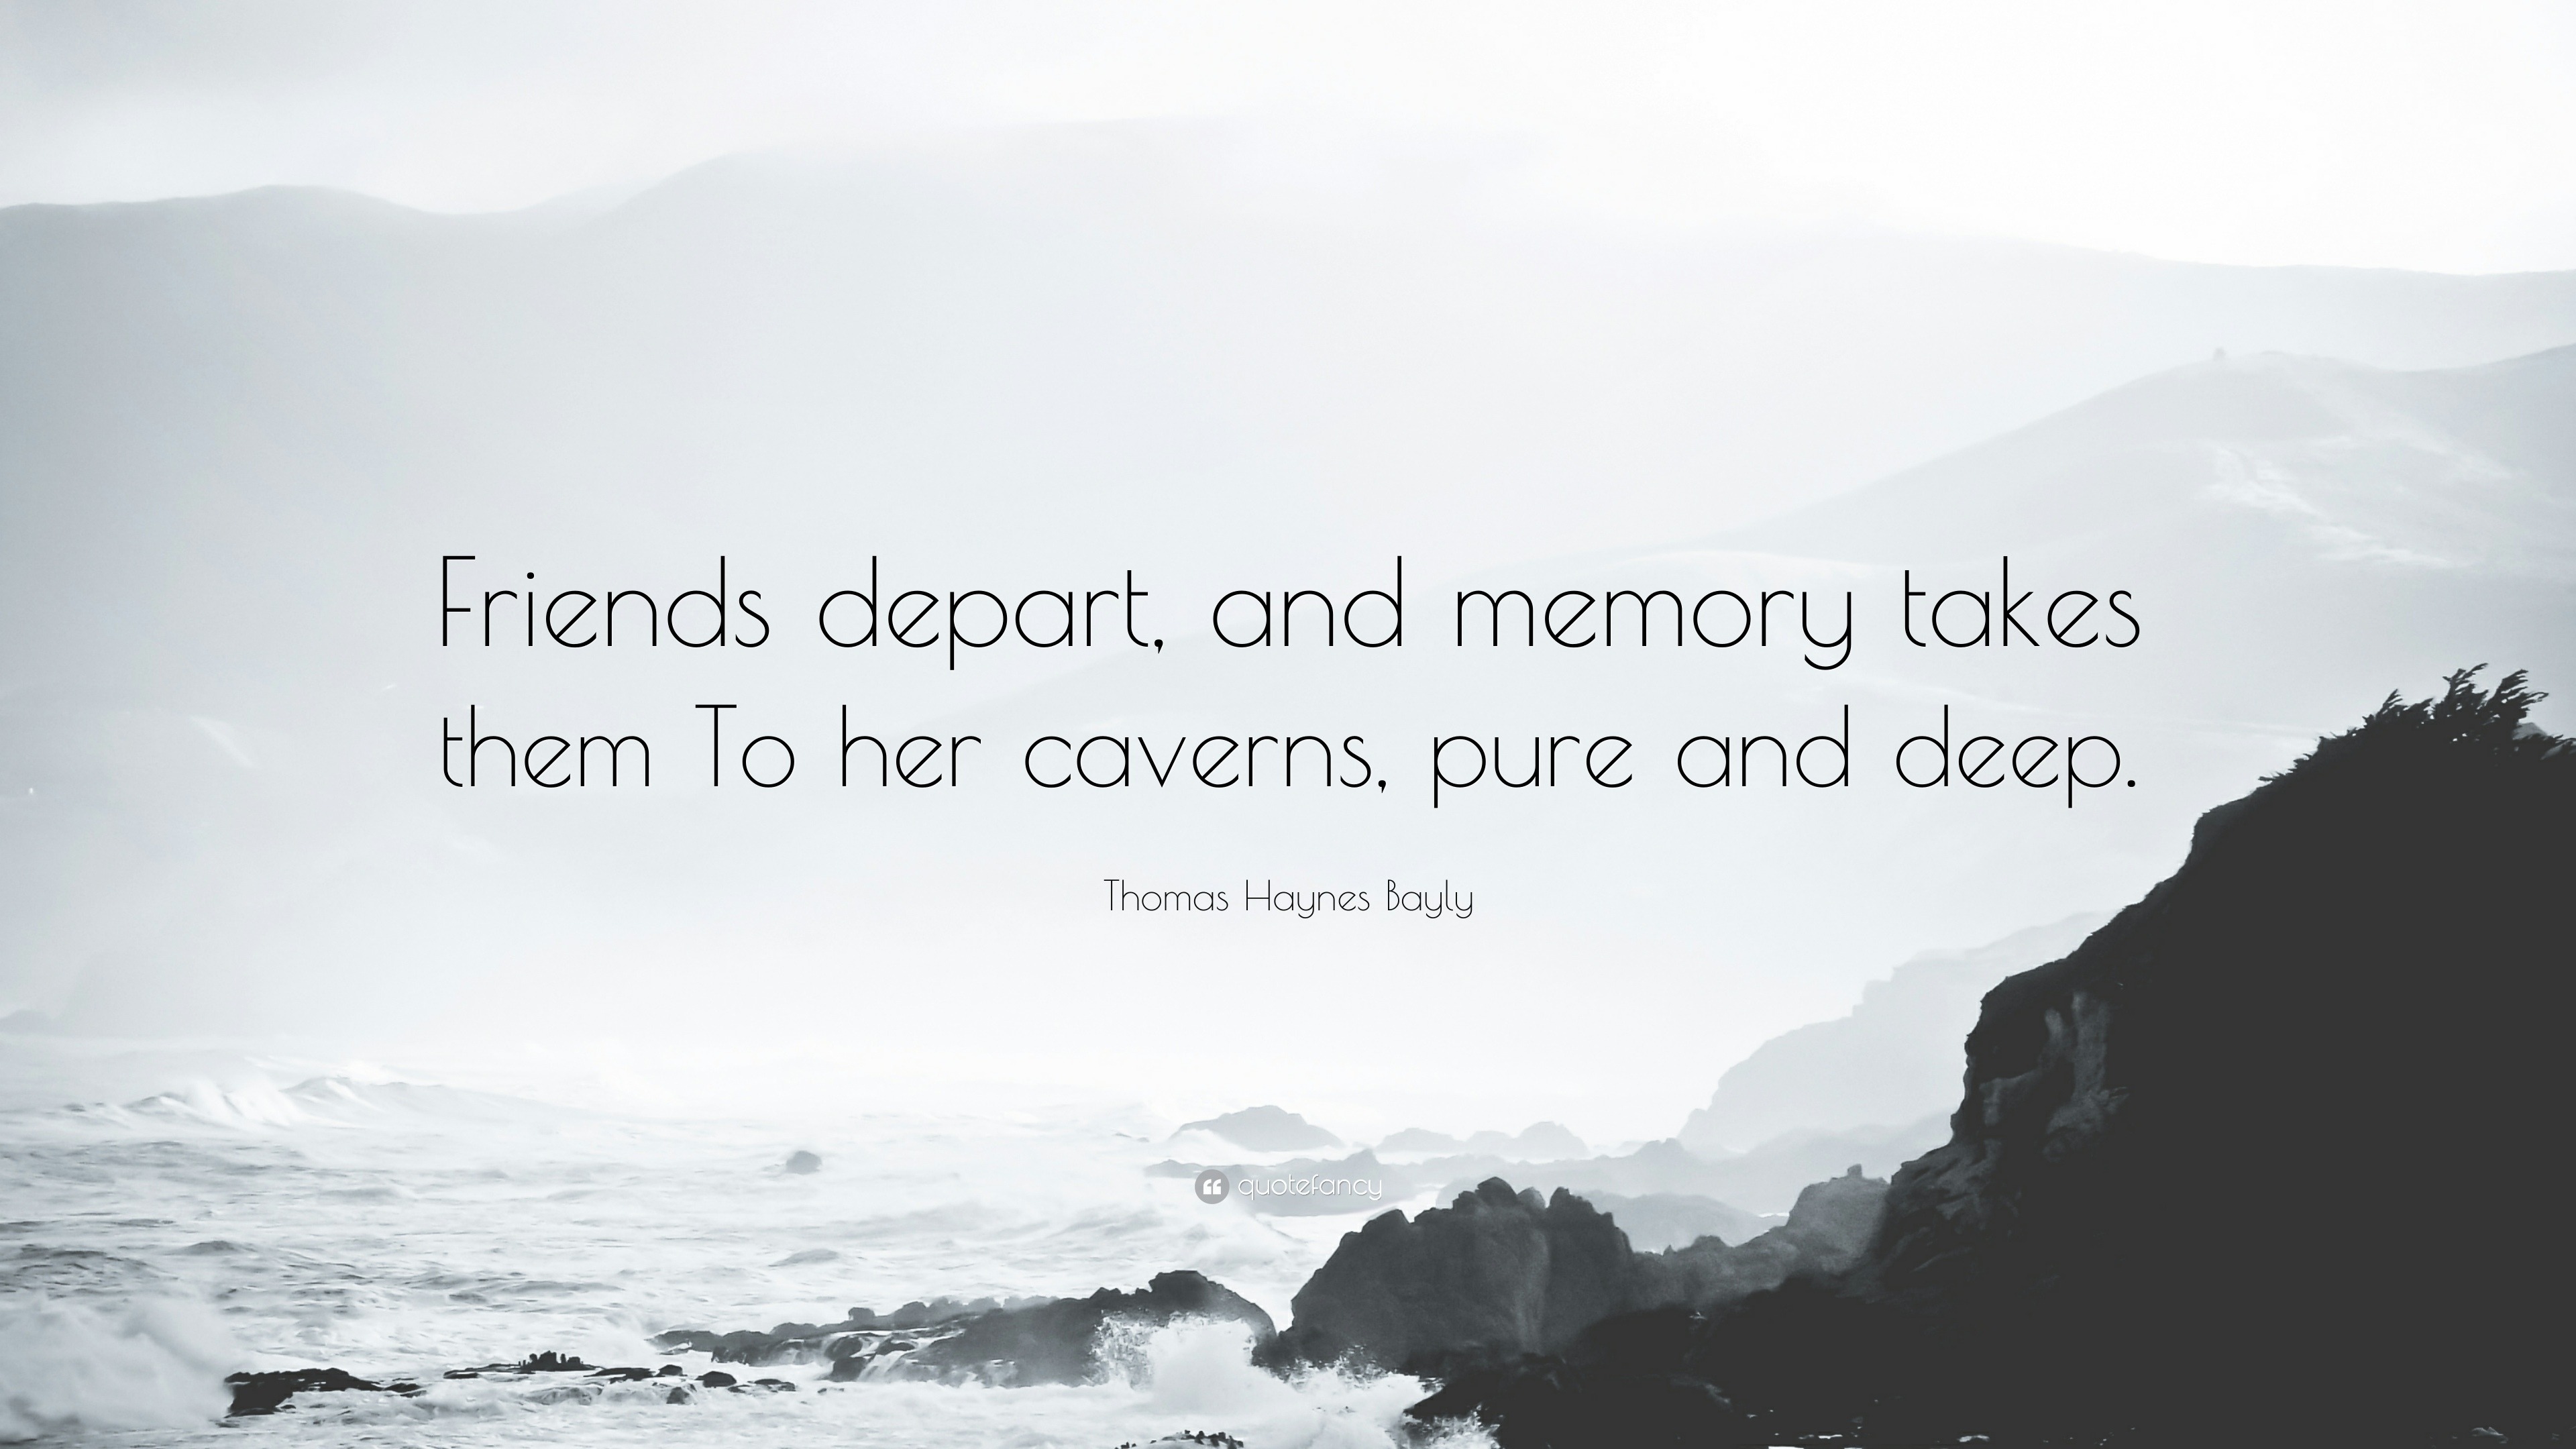 Thomas Haynes Bayly Quote: “Friends depart, and memory takes them